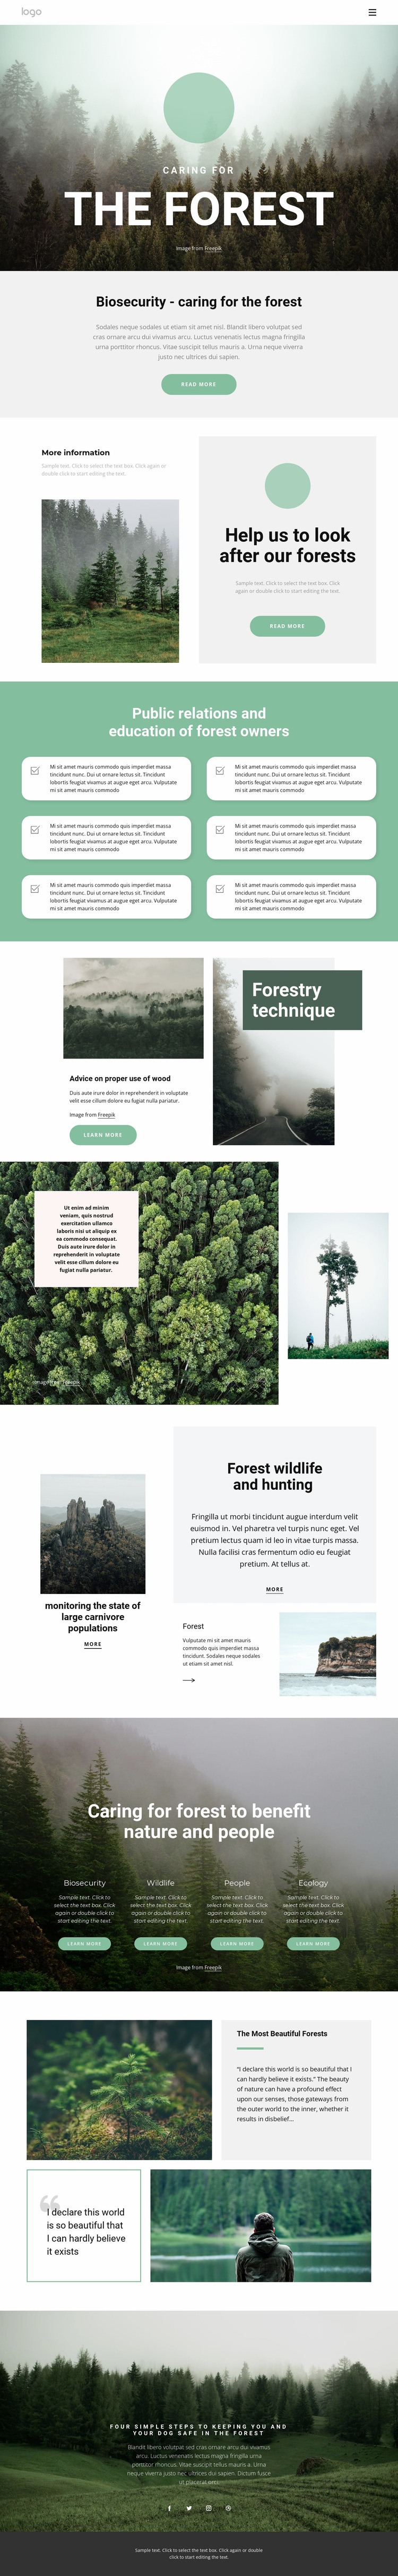 Caring for parks and forests Html Code Example